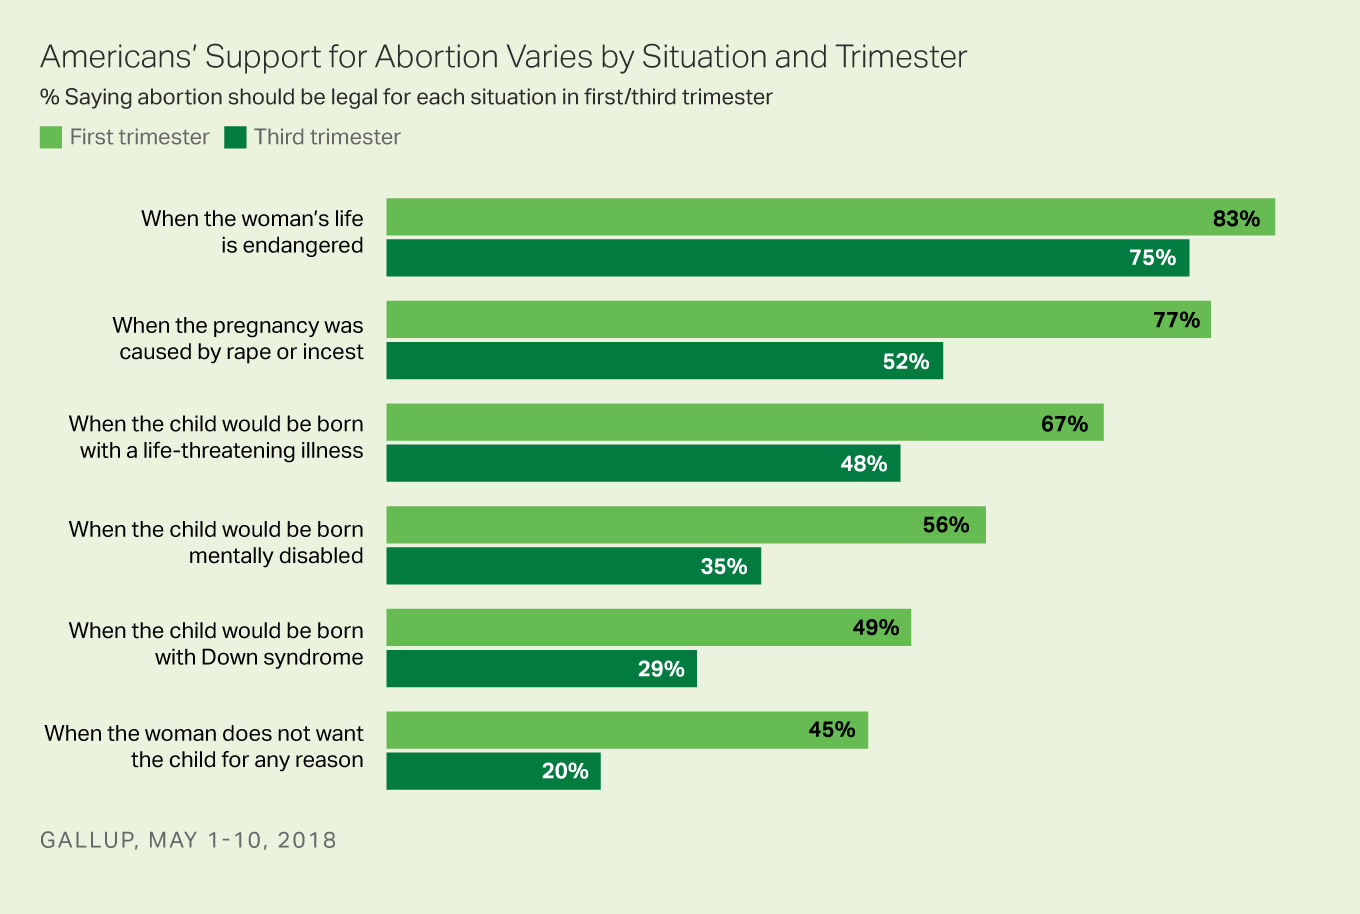 Bar graph: Support for abortion depends on situation, by trimester, 2018. Top %: 83% say it should be legal when woman's life is endangered.